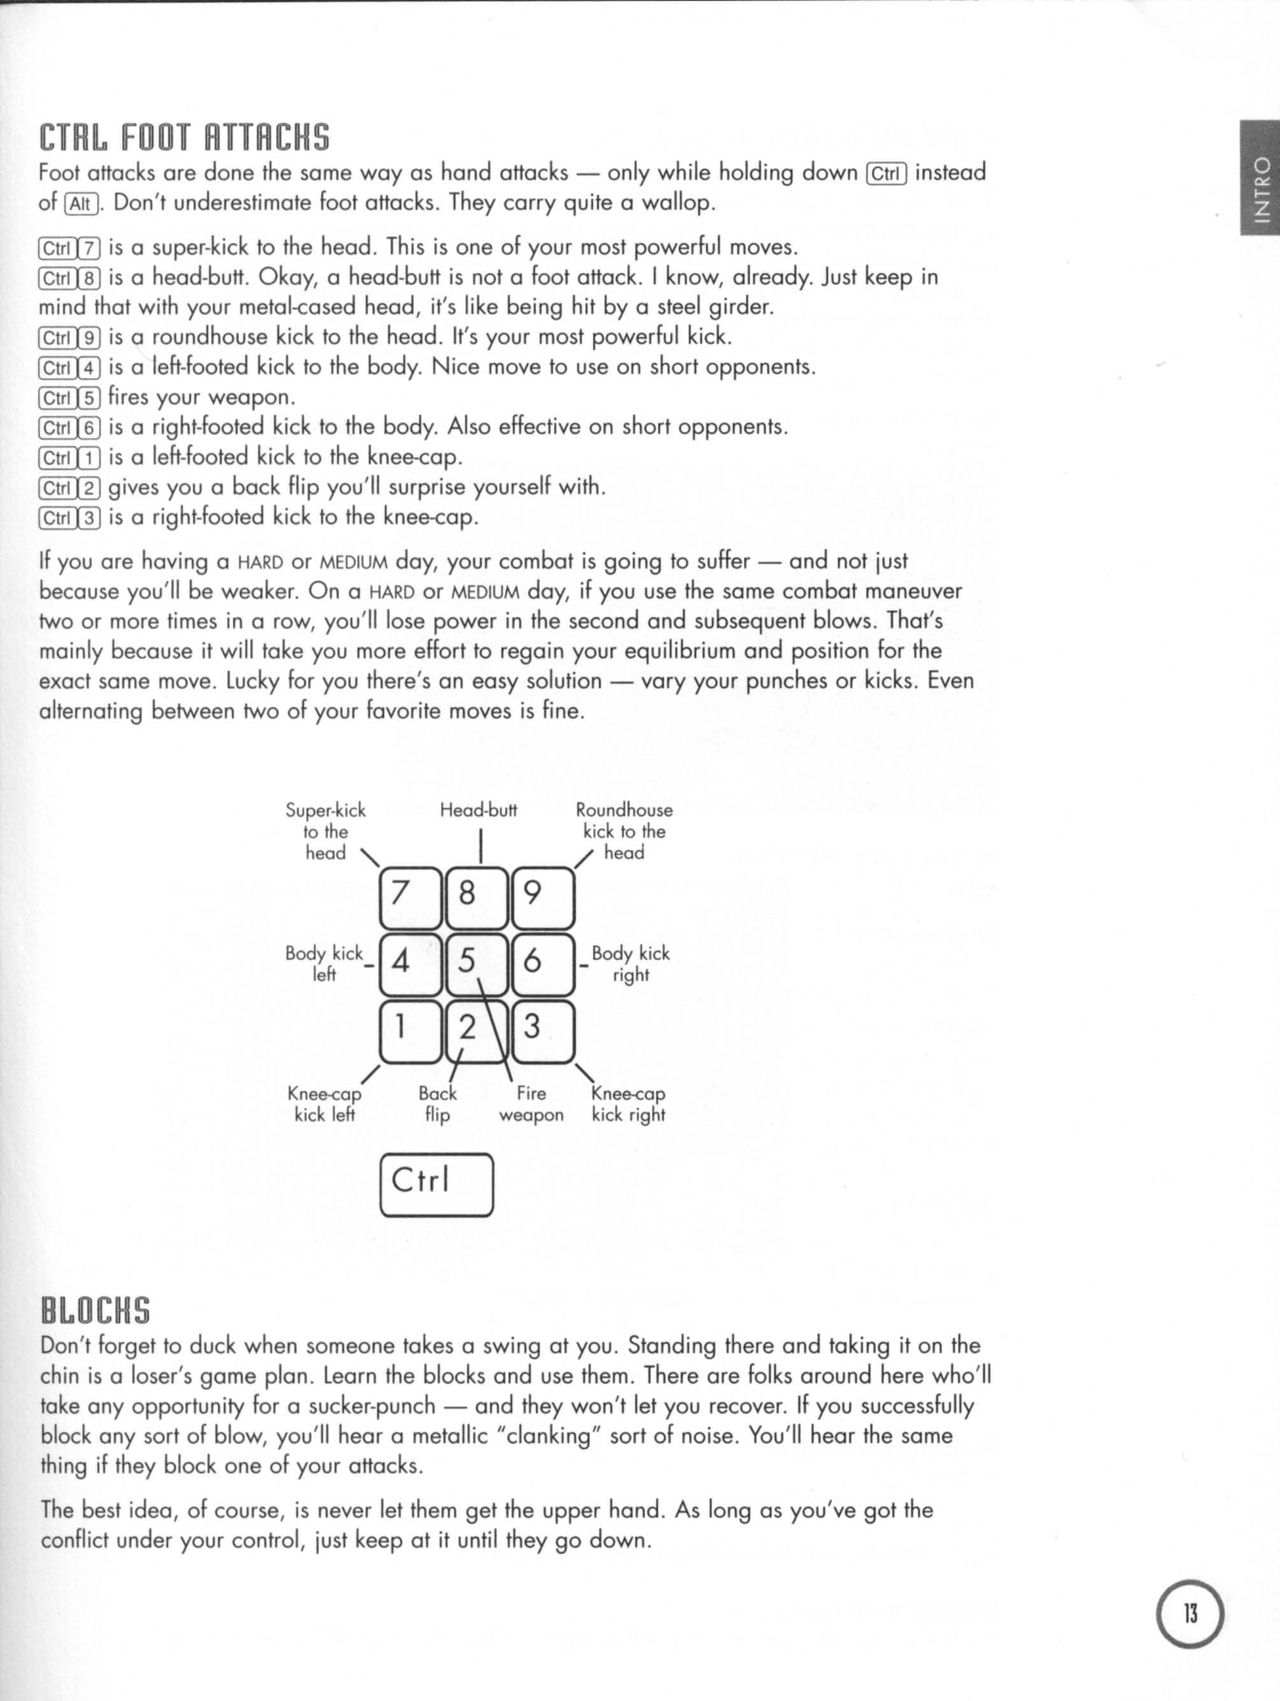 BioForge (PC (DOS/Windows)) Strategy Guide 13